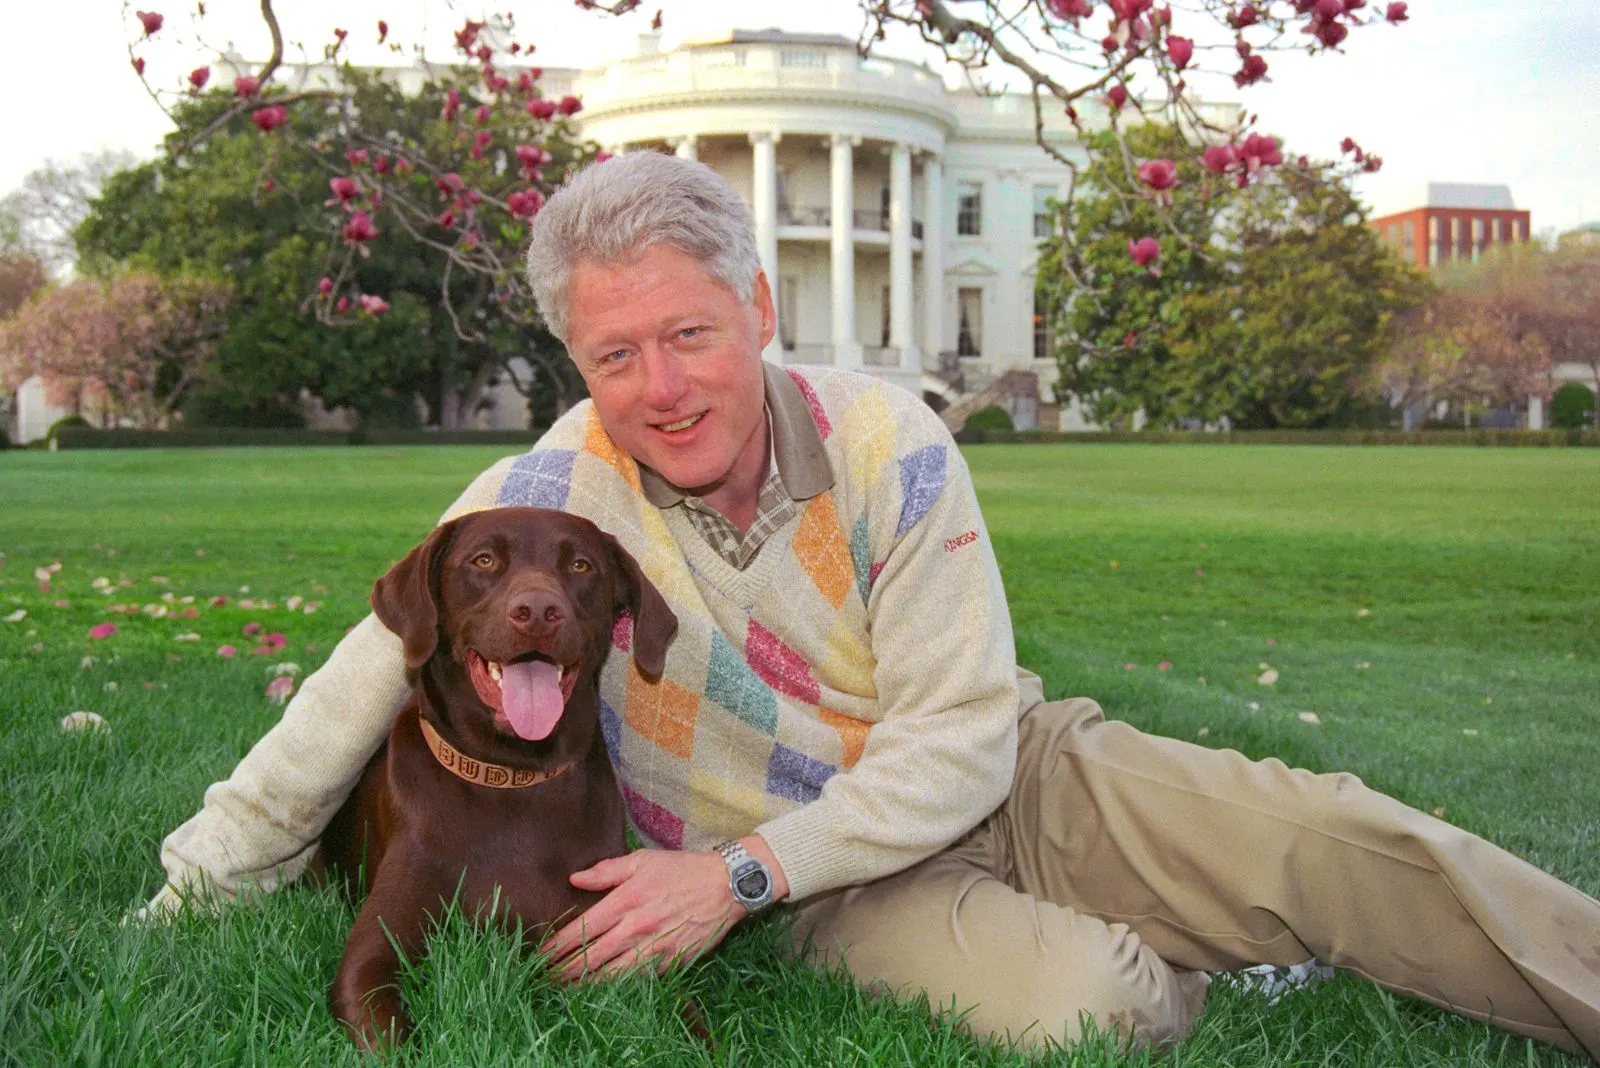 Bill Clinton is sitting in the garden on the grass with his dog